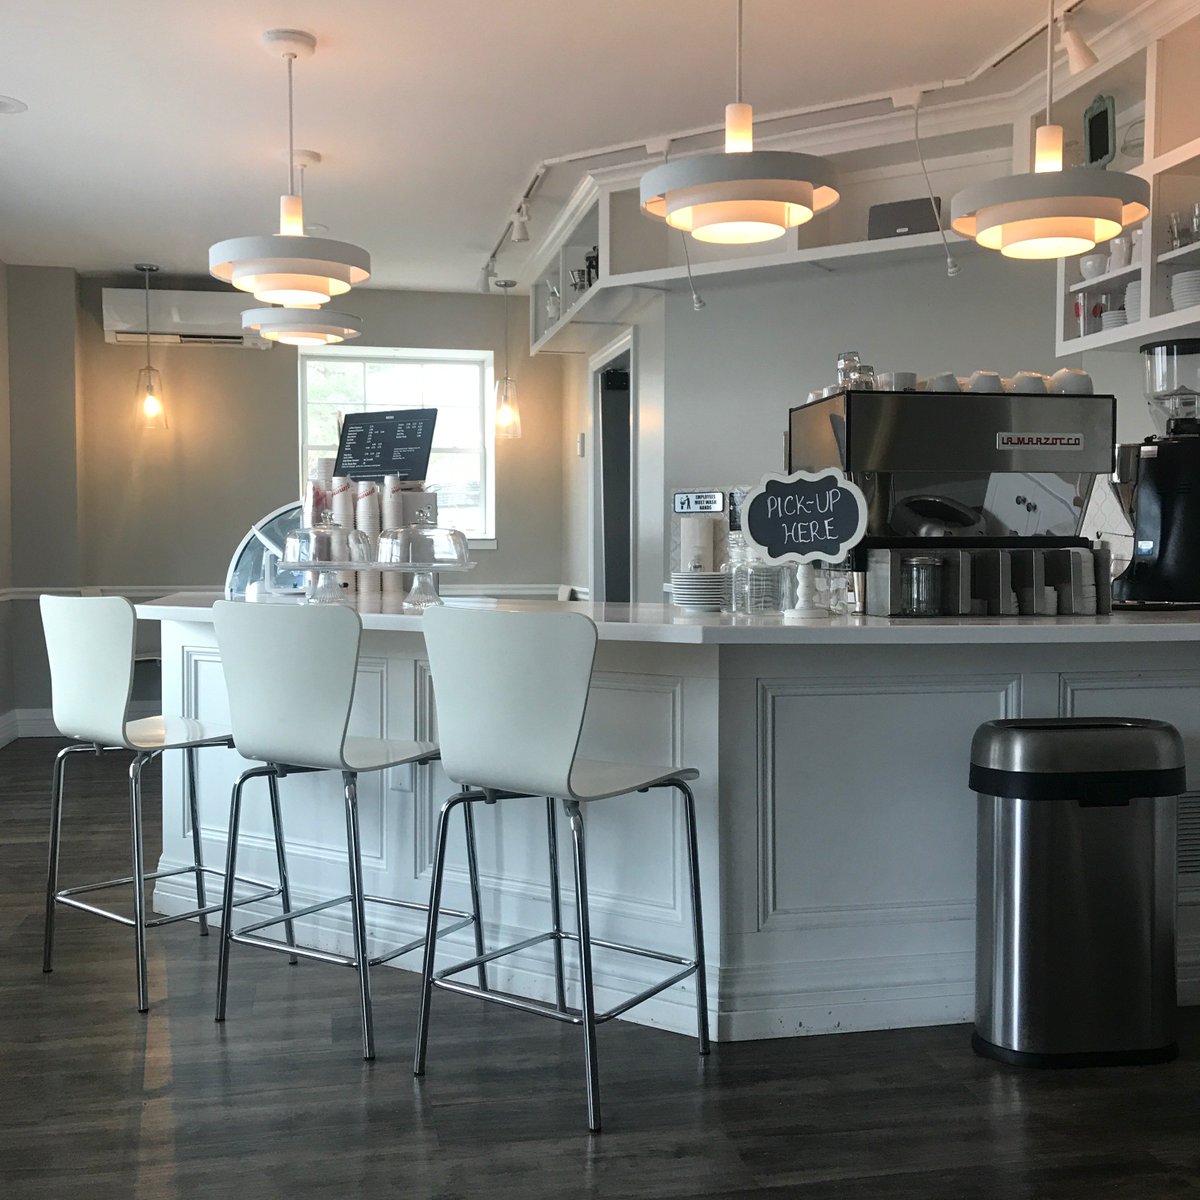 You are invited to the soft opening of our new cafe in Community Corners @ 903 Hanshaw in Cayuga Heights. From 4/30 to 5/20 we'll be open daily 7am -1pm. Normal extended hours begin 5/21. Please share and tag your friends. Thanks! #communitycorners #cayugaheights #newcafe #gimme